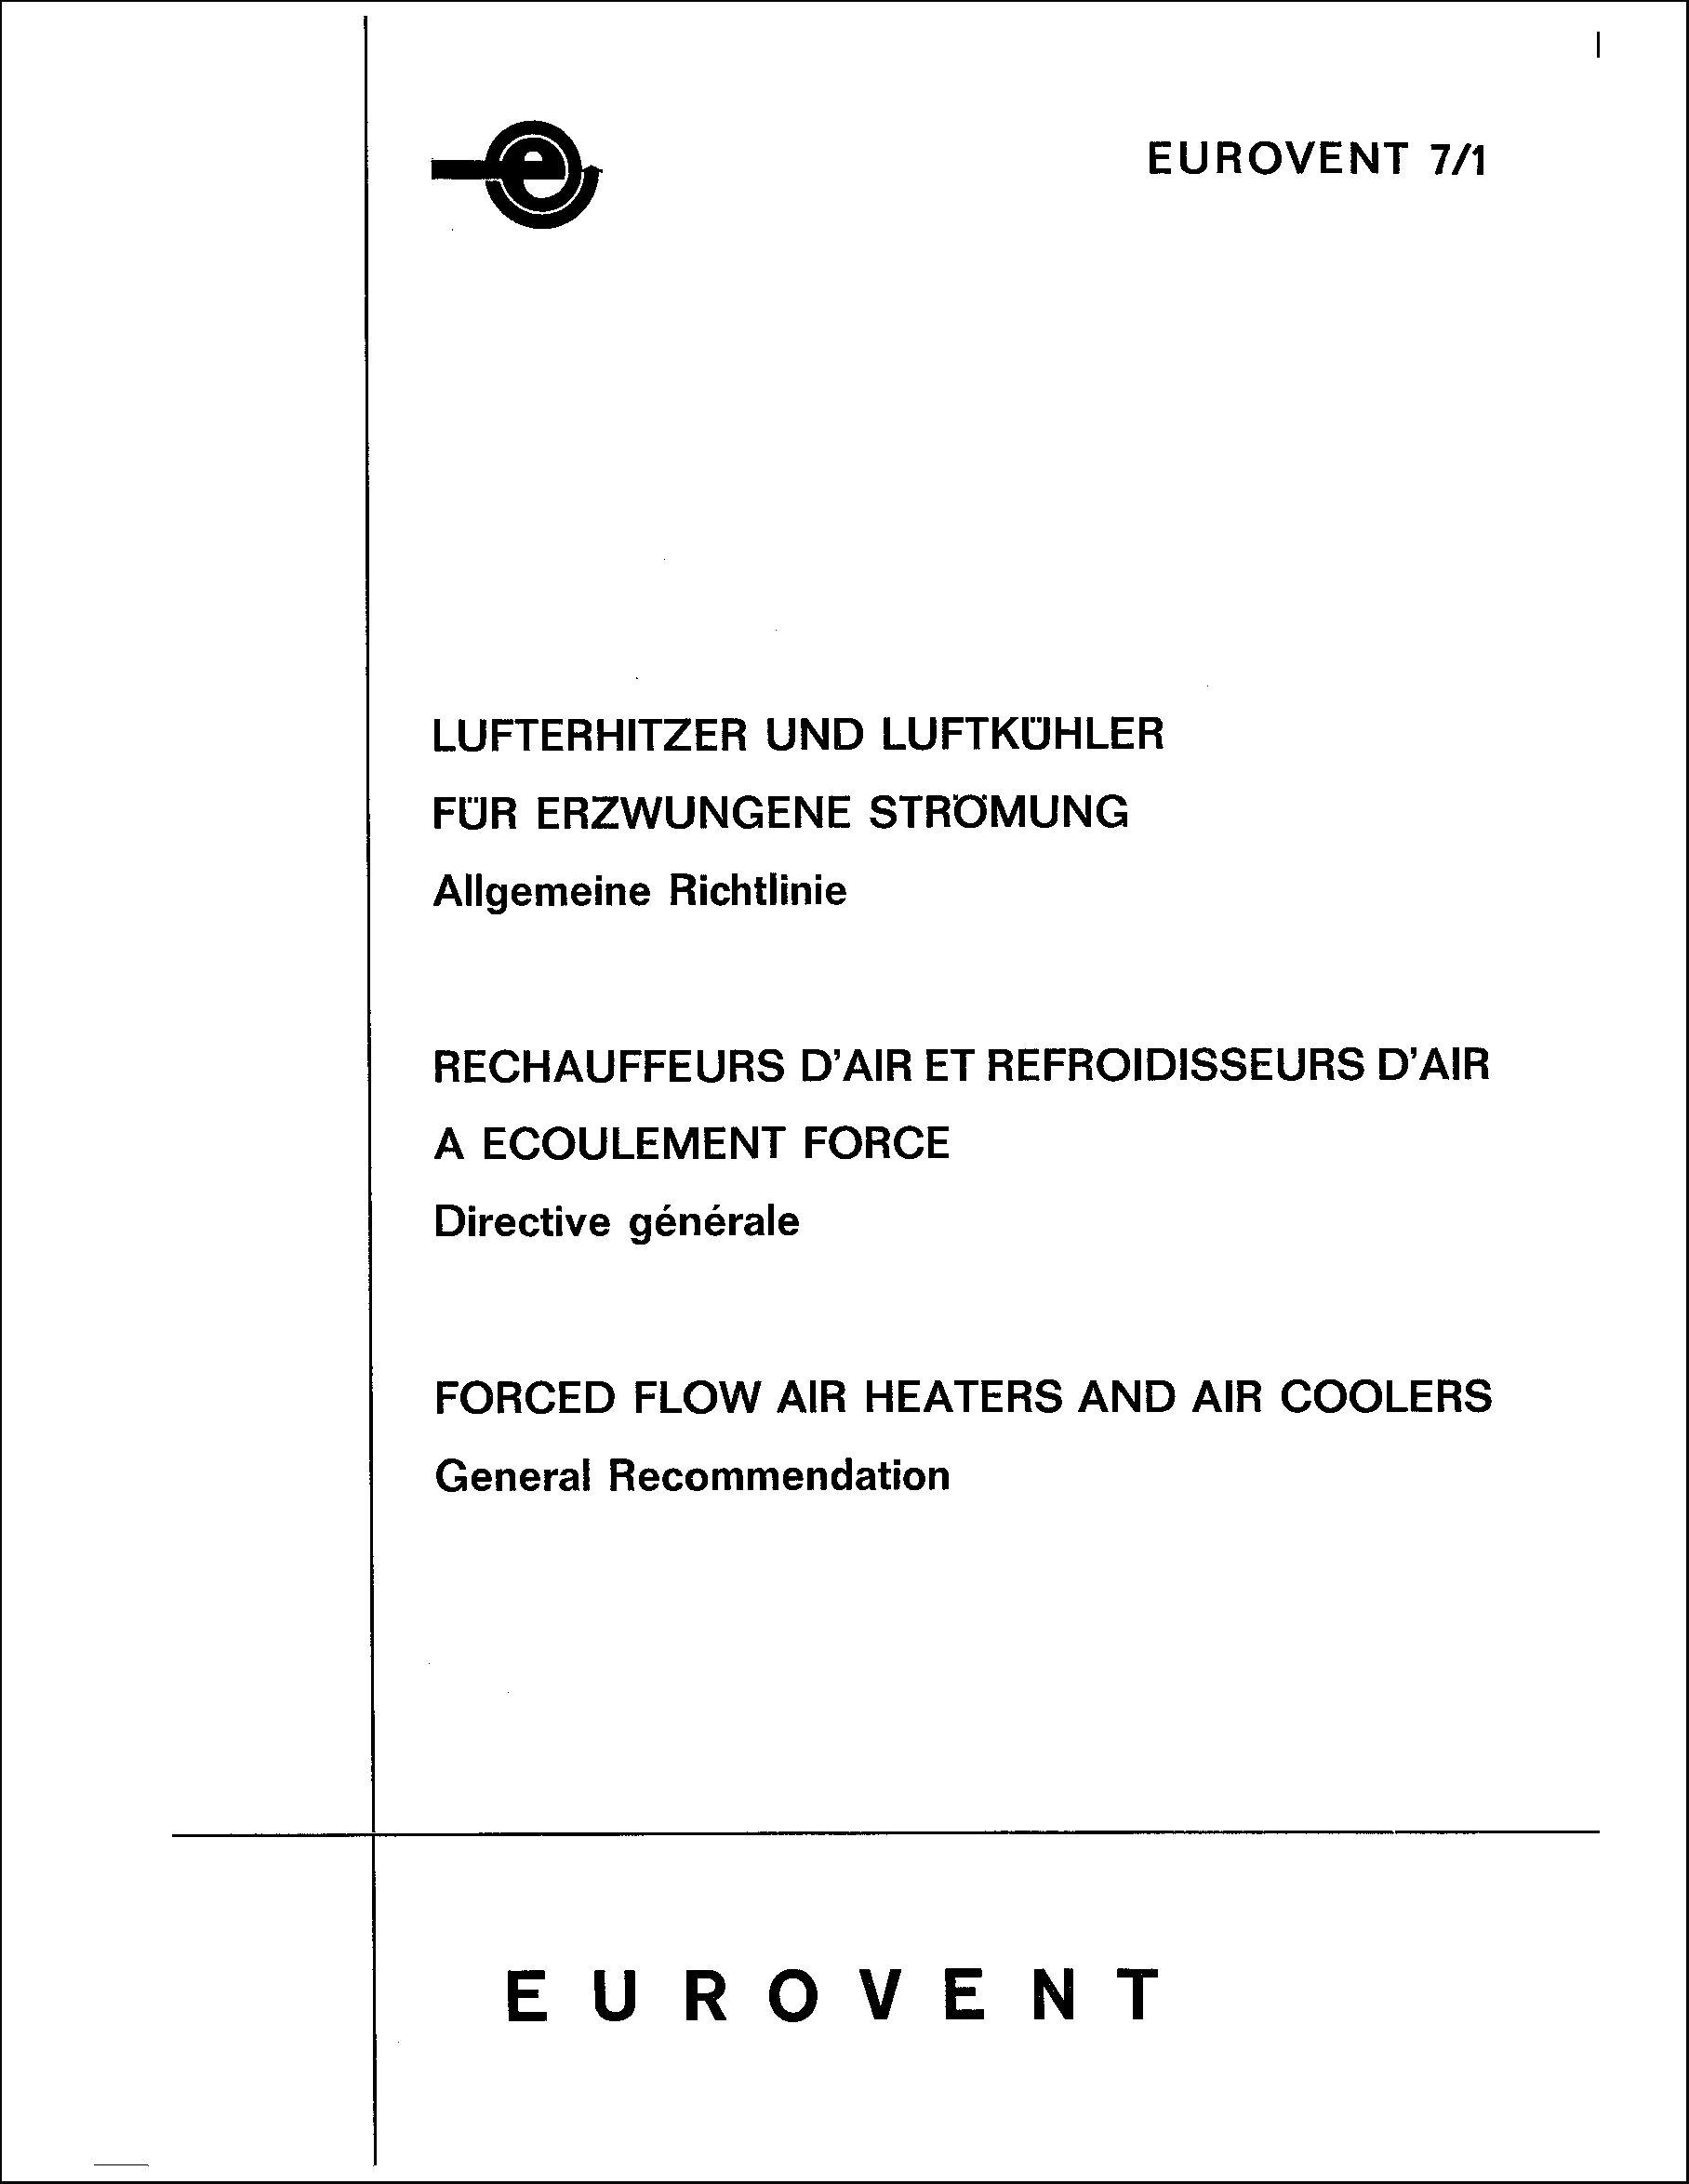 1983 - General Recommendation for forced flow air heaters and air coolers